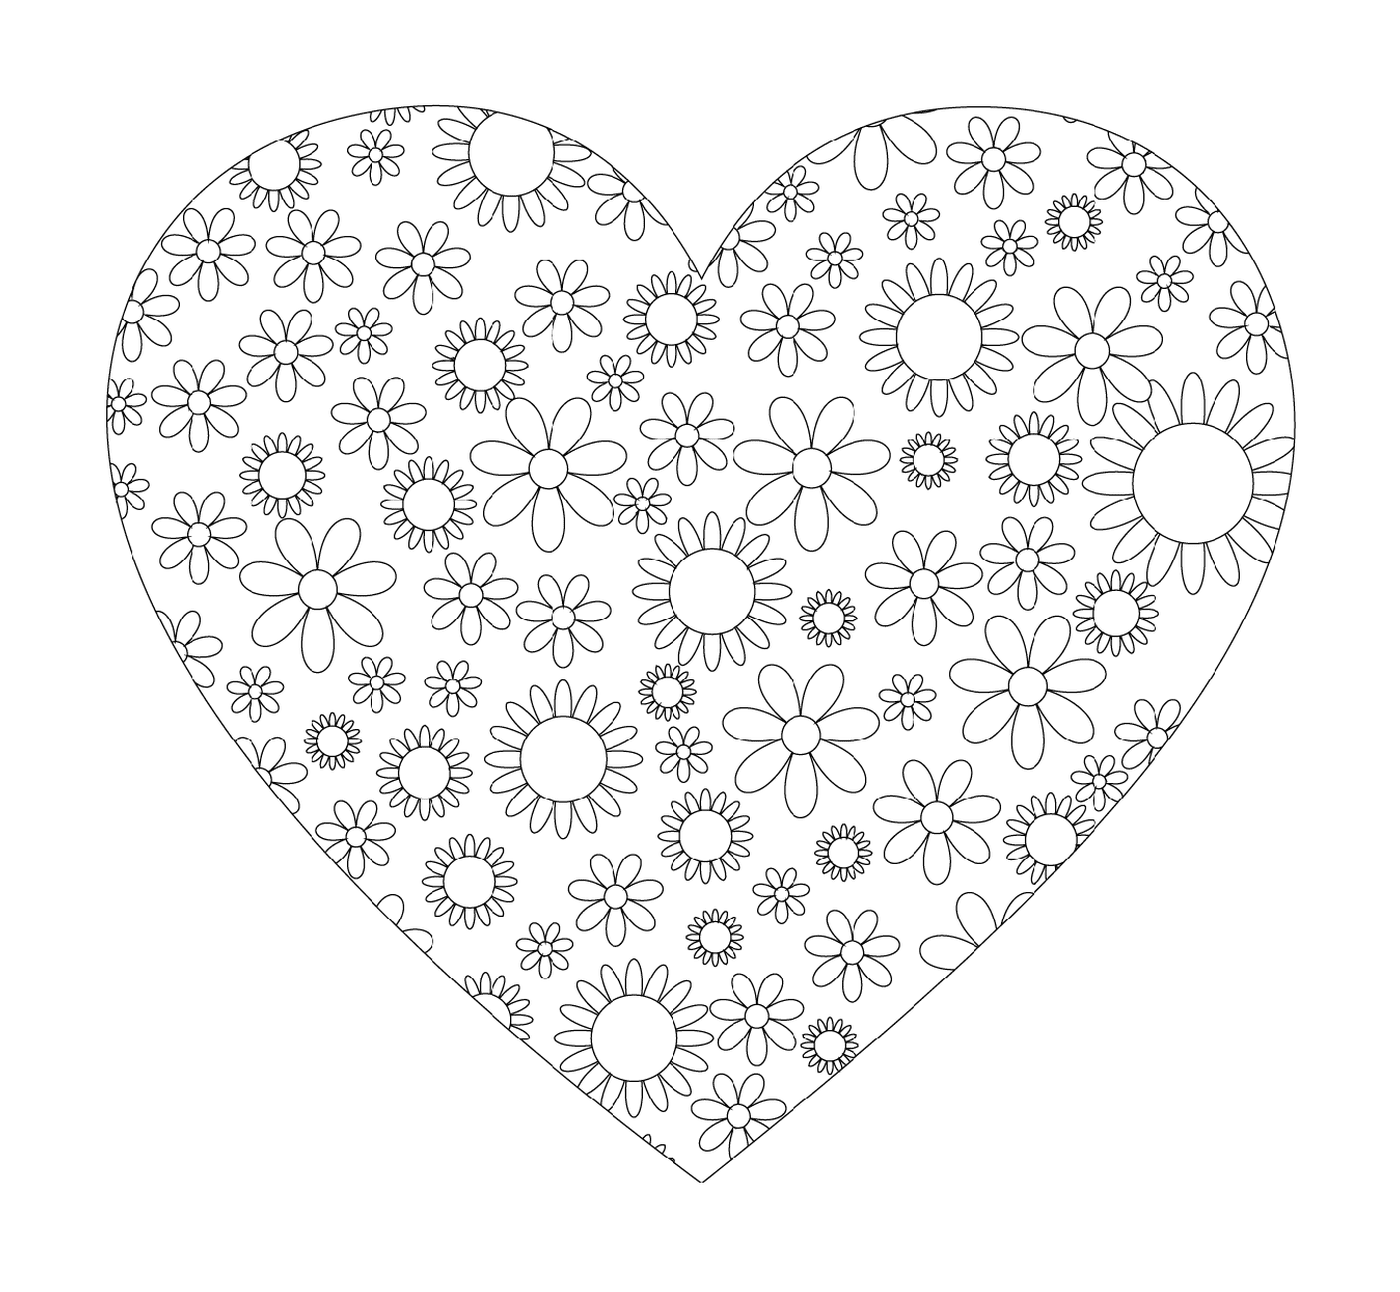  Simple heart with charming floral motifs 